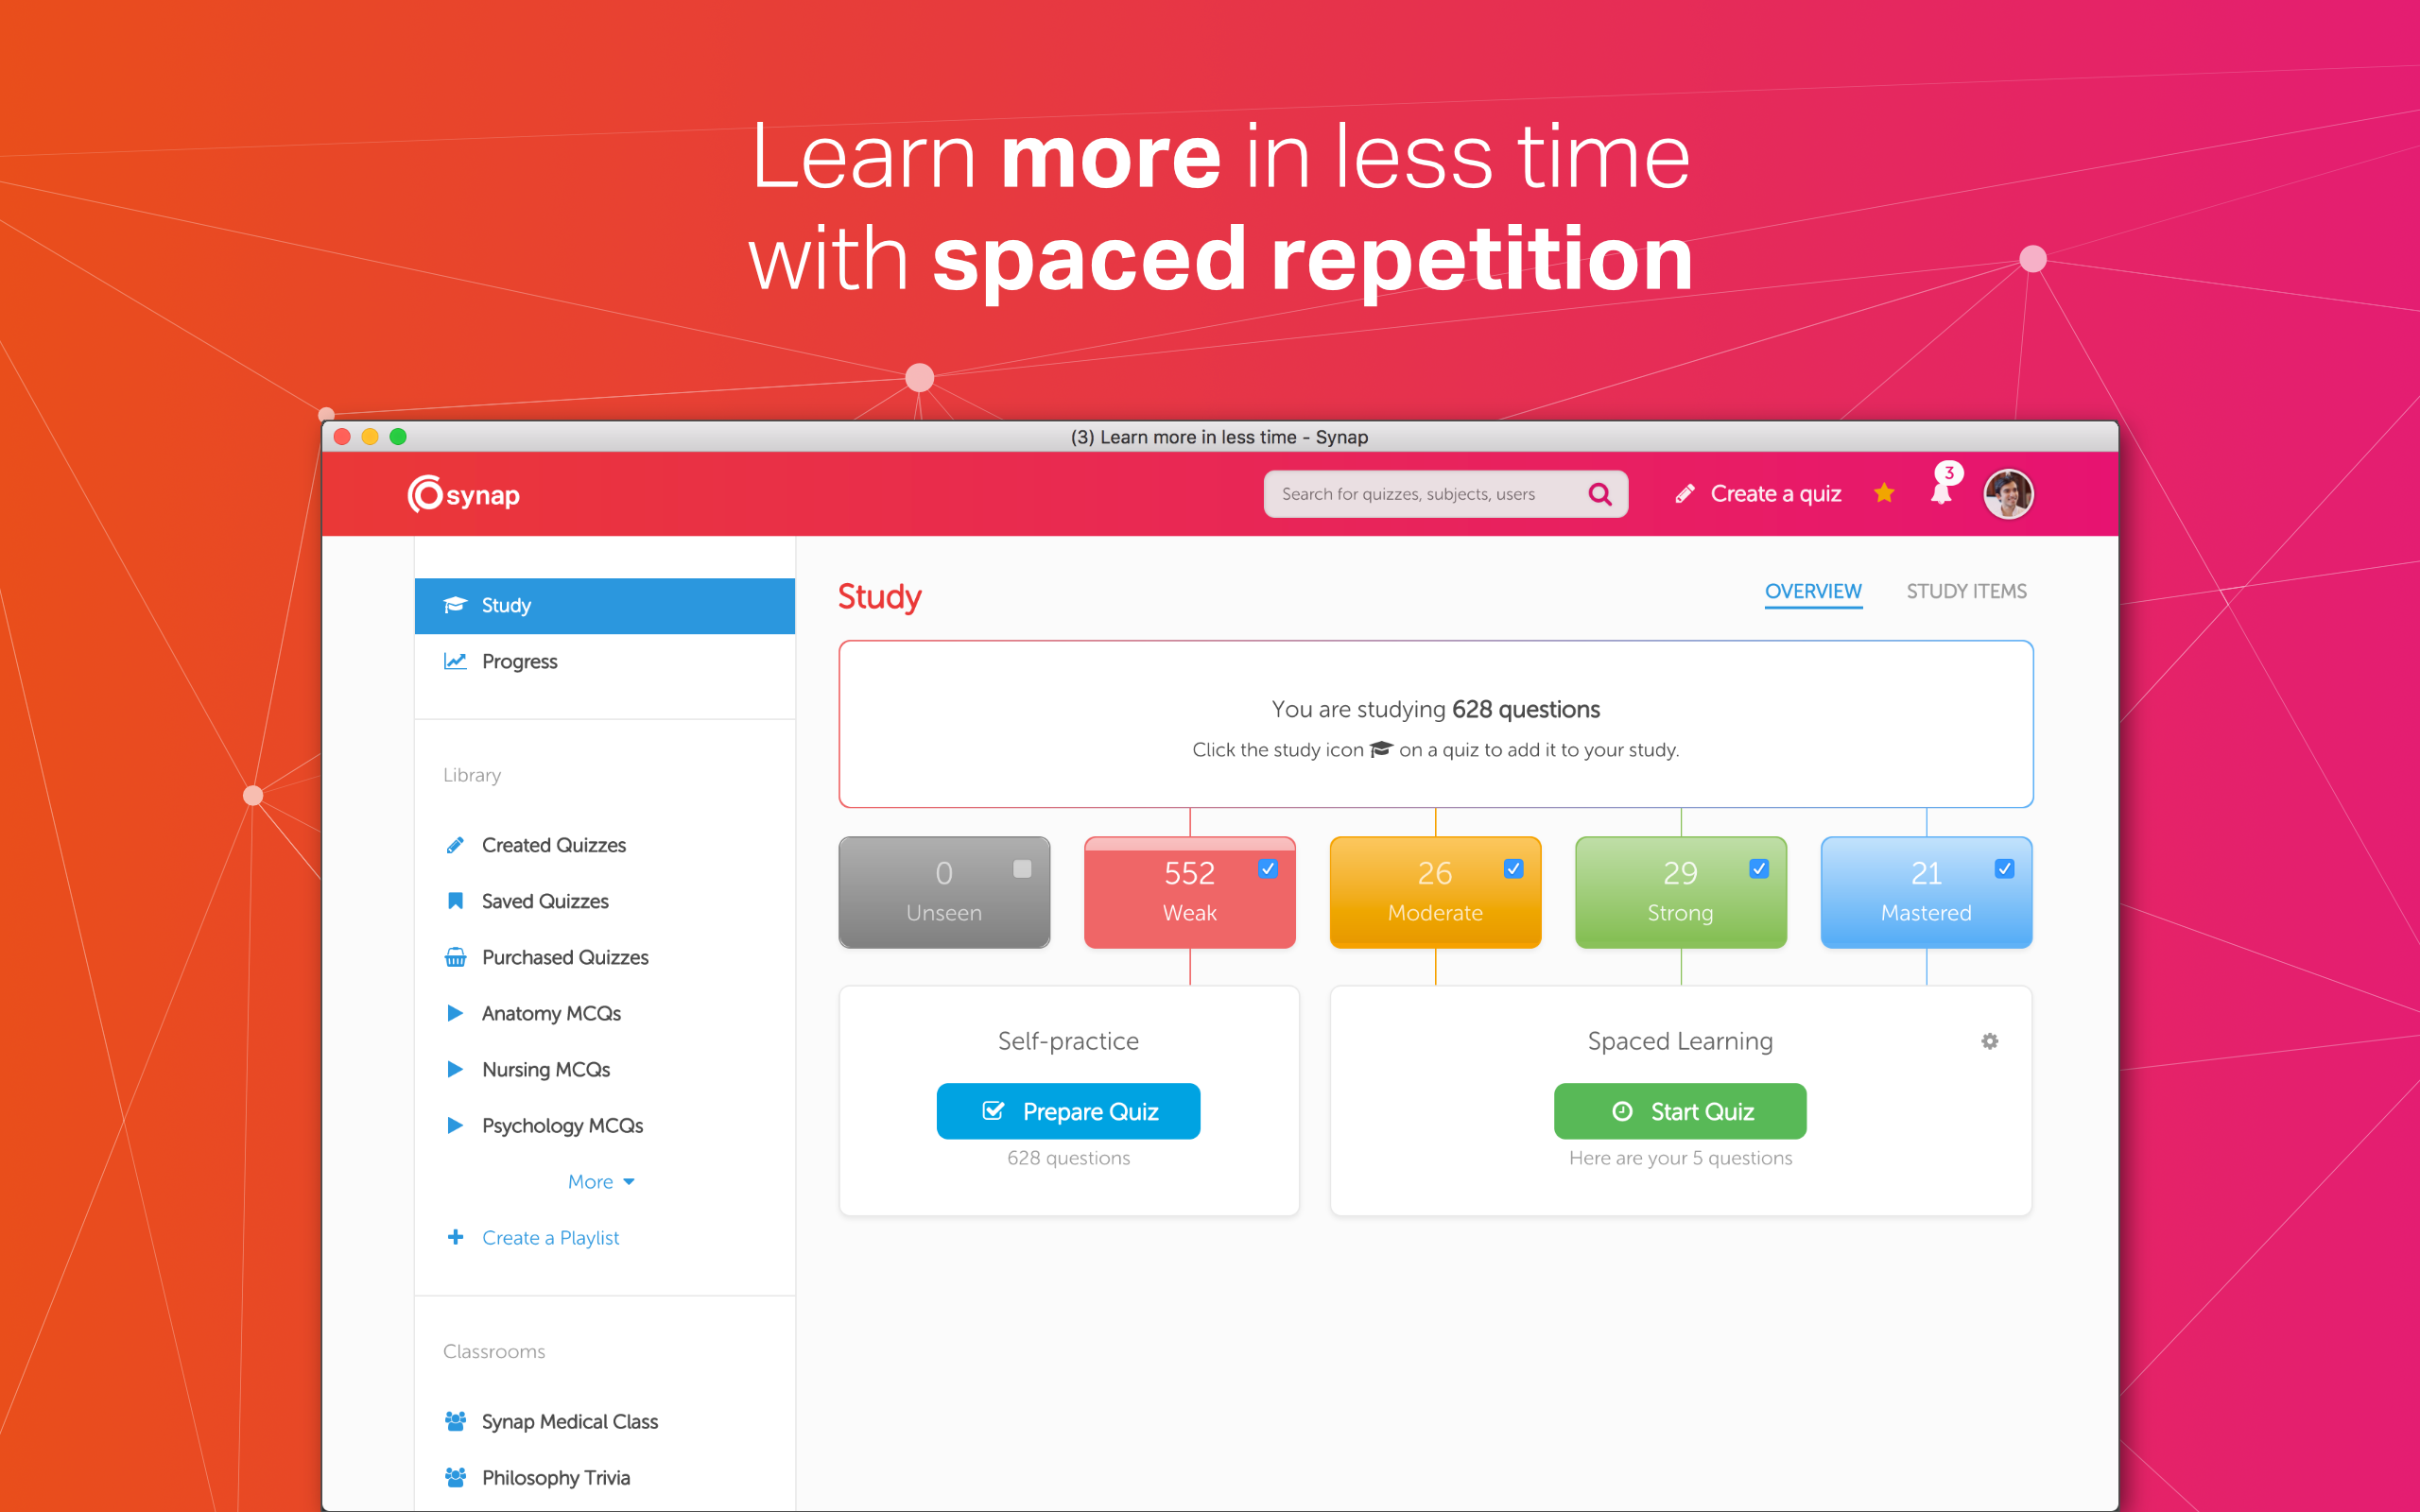 Learn more in less time with Spaced Repetition